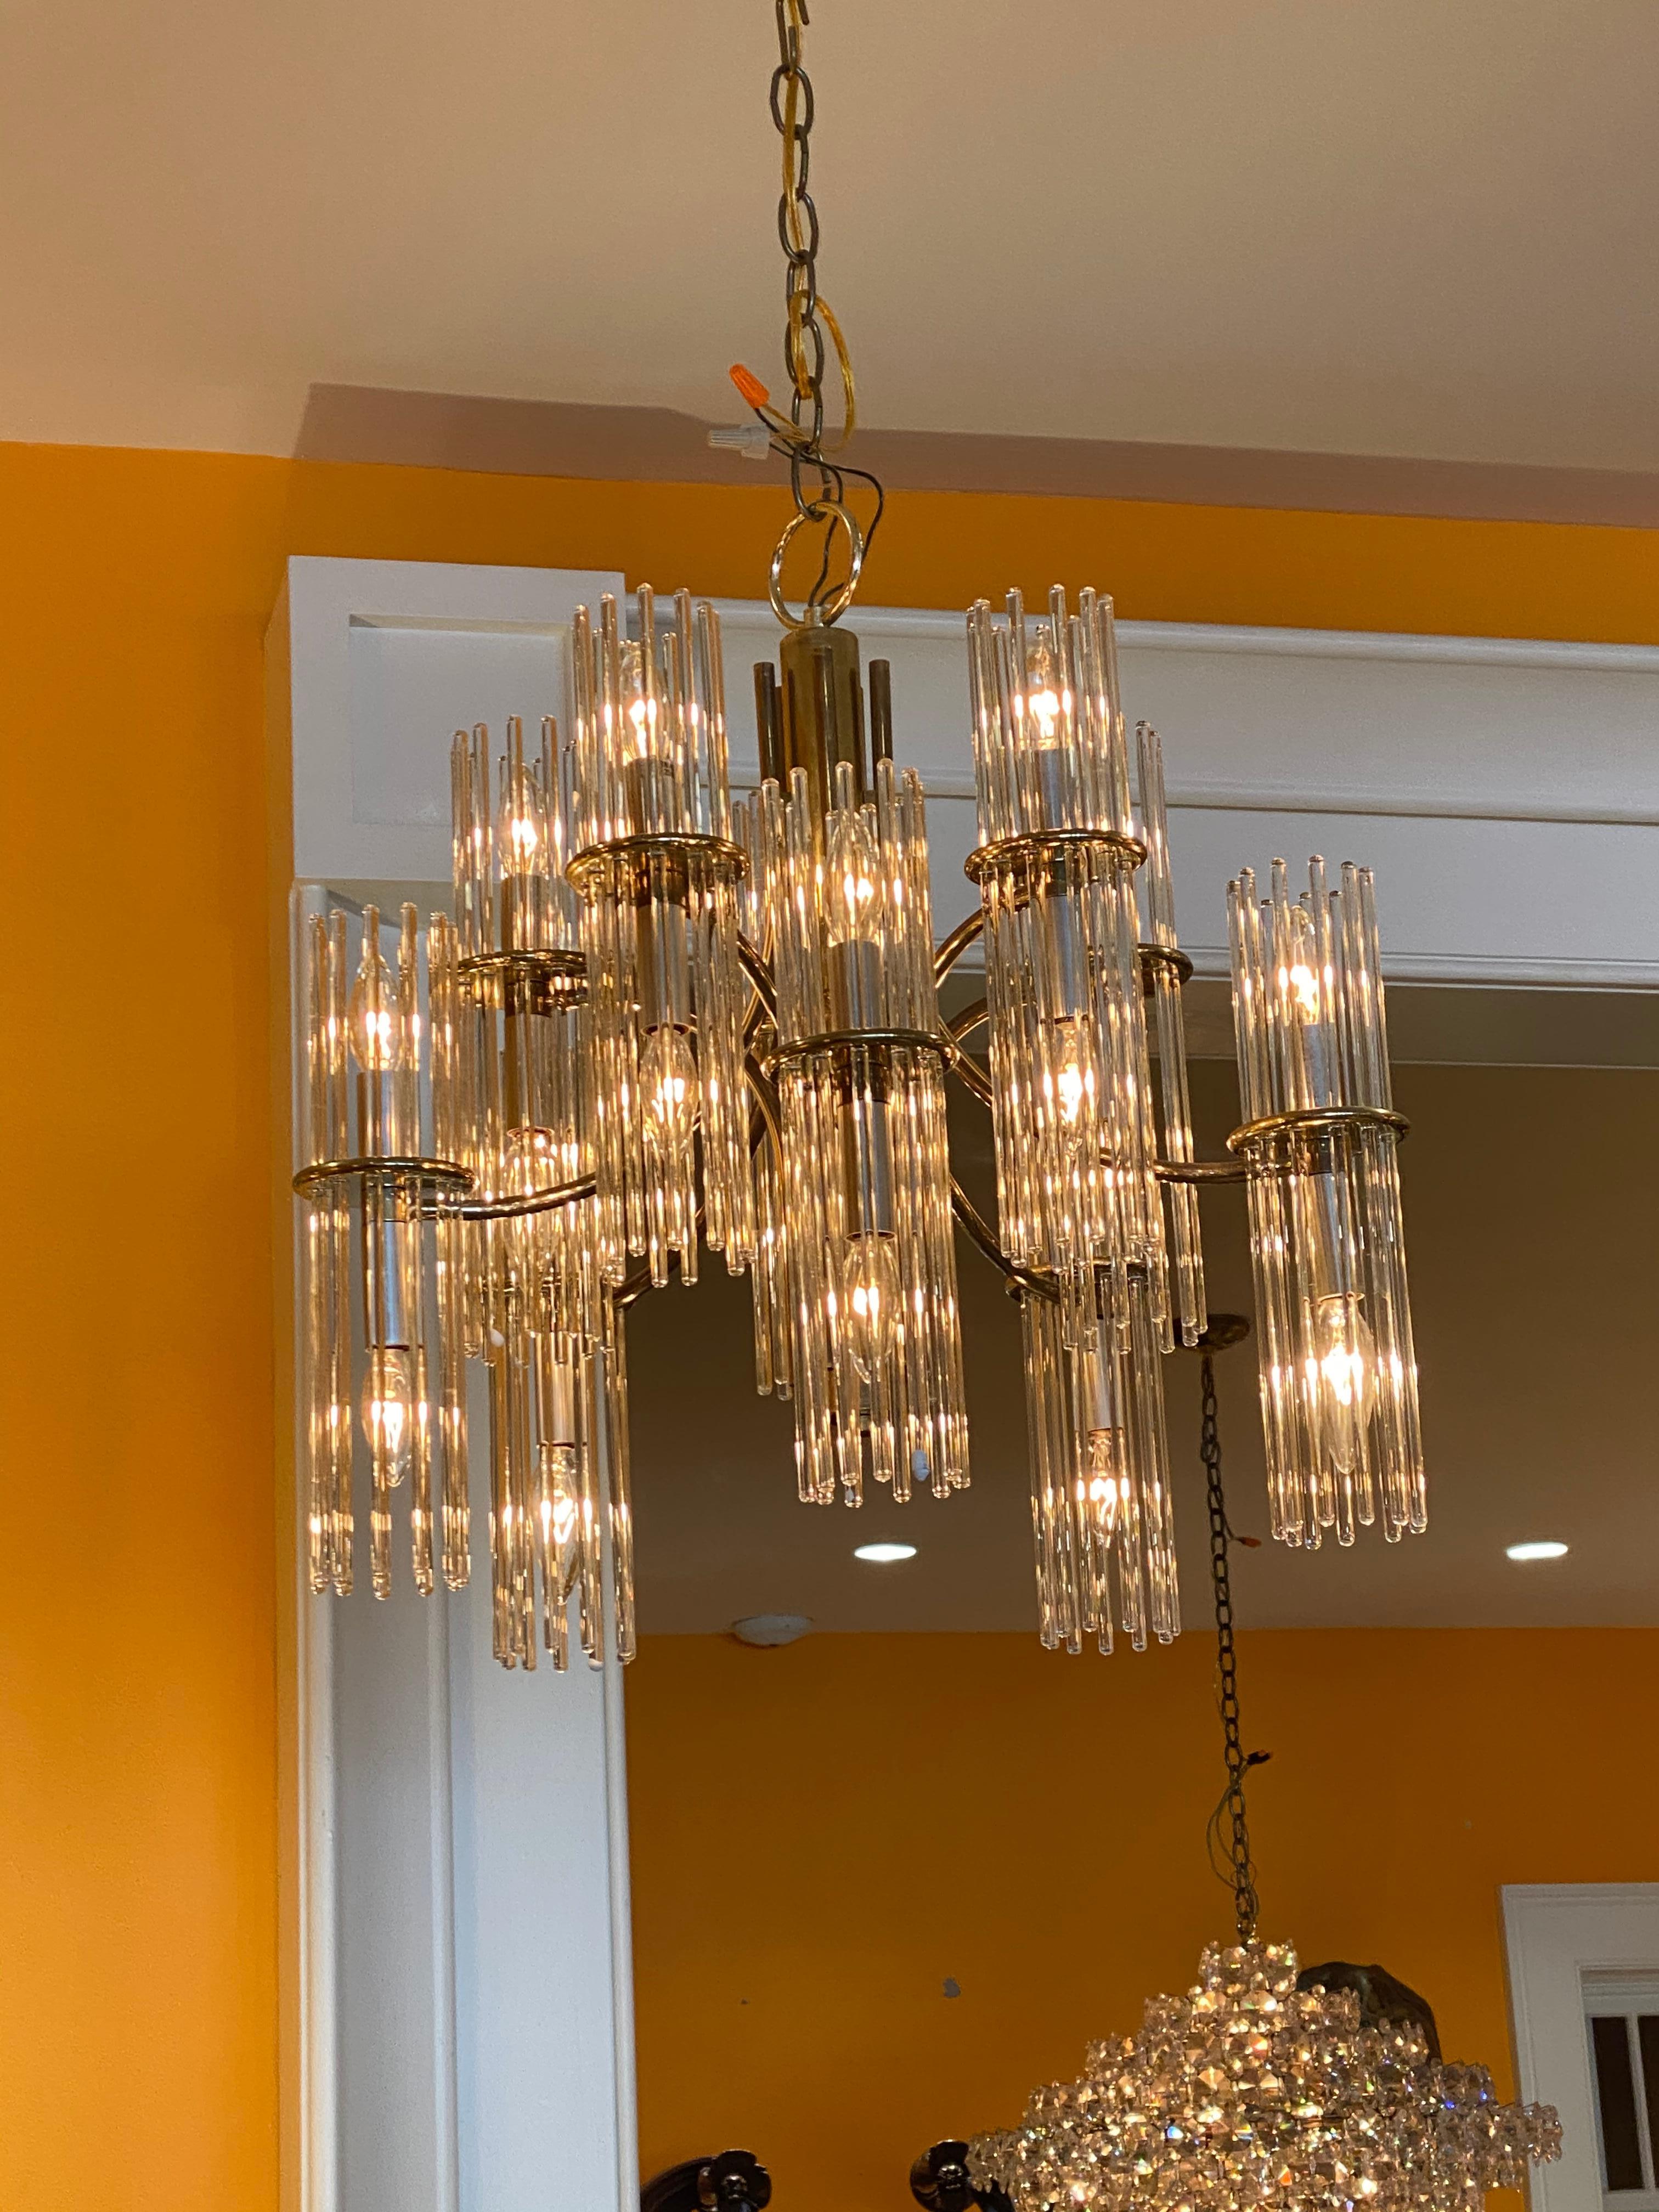 Brass-plated 10 arm midcentury chandelier with glass prisms.